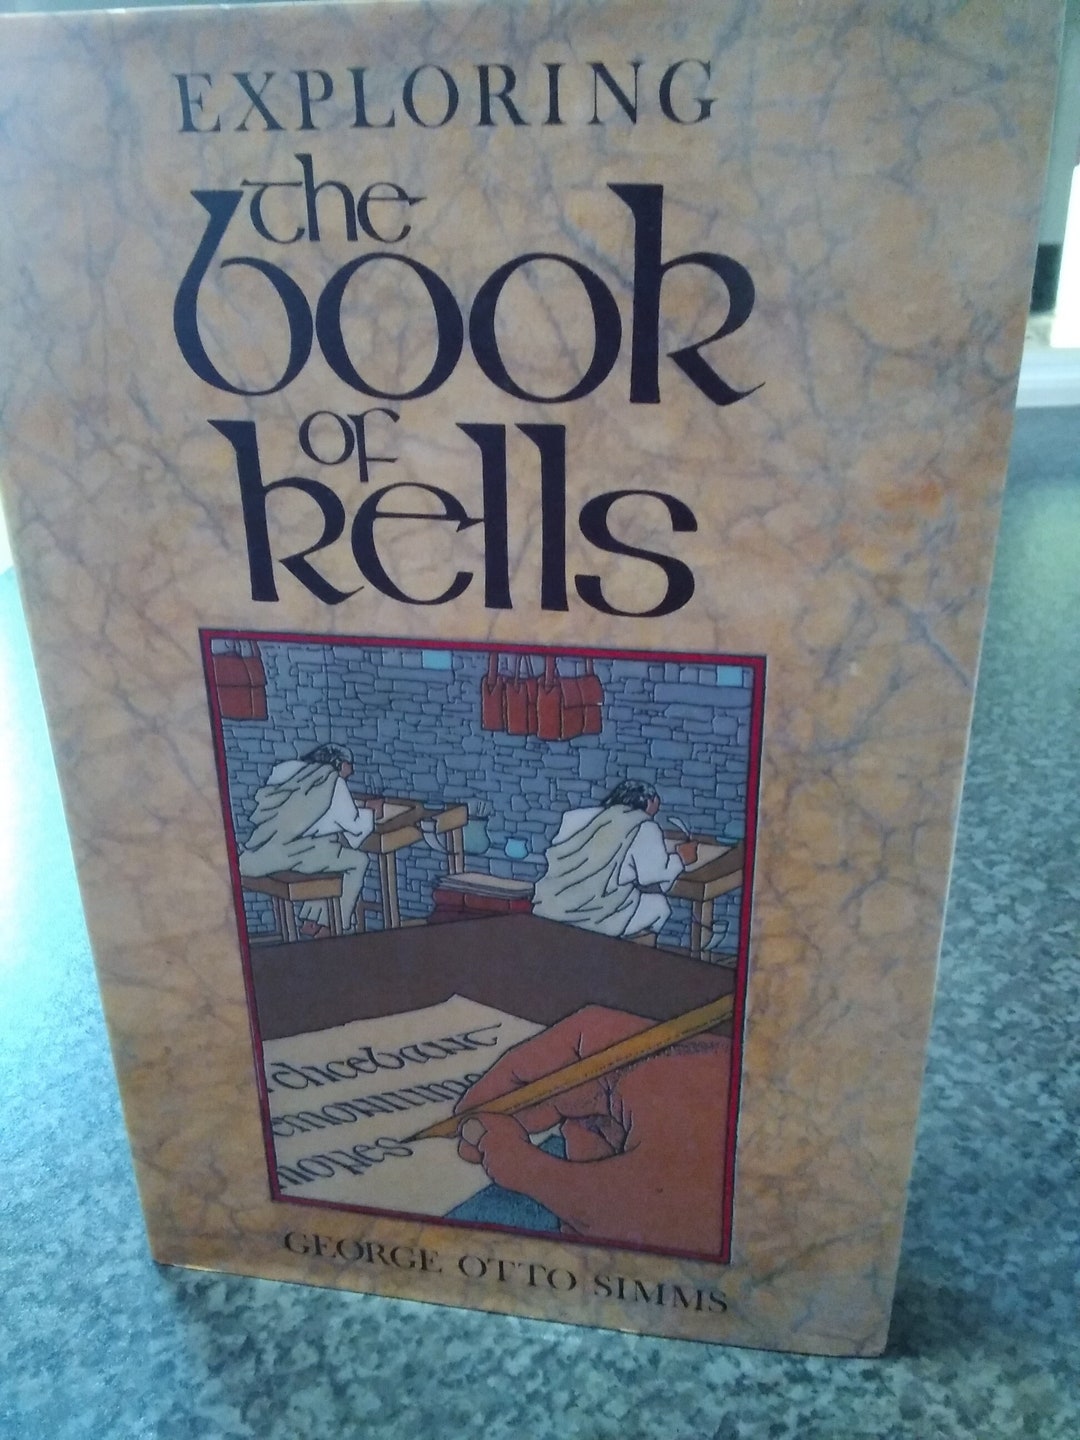 Otto　George　Etsy　Exploring　the　Book　Kells　of　by　First　Edition